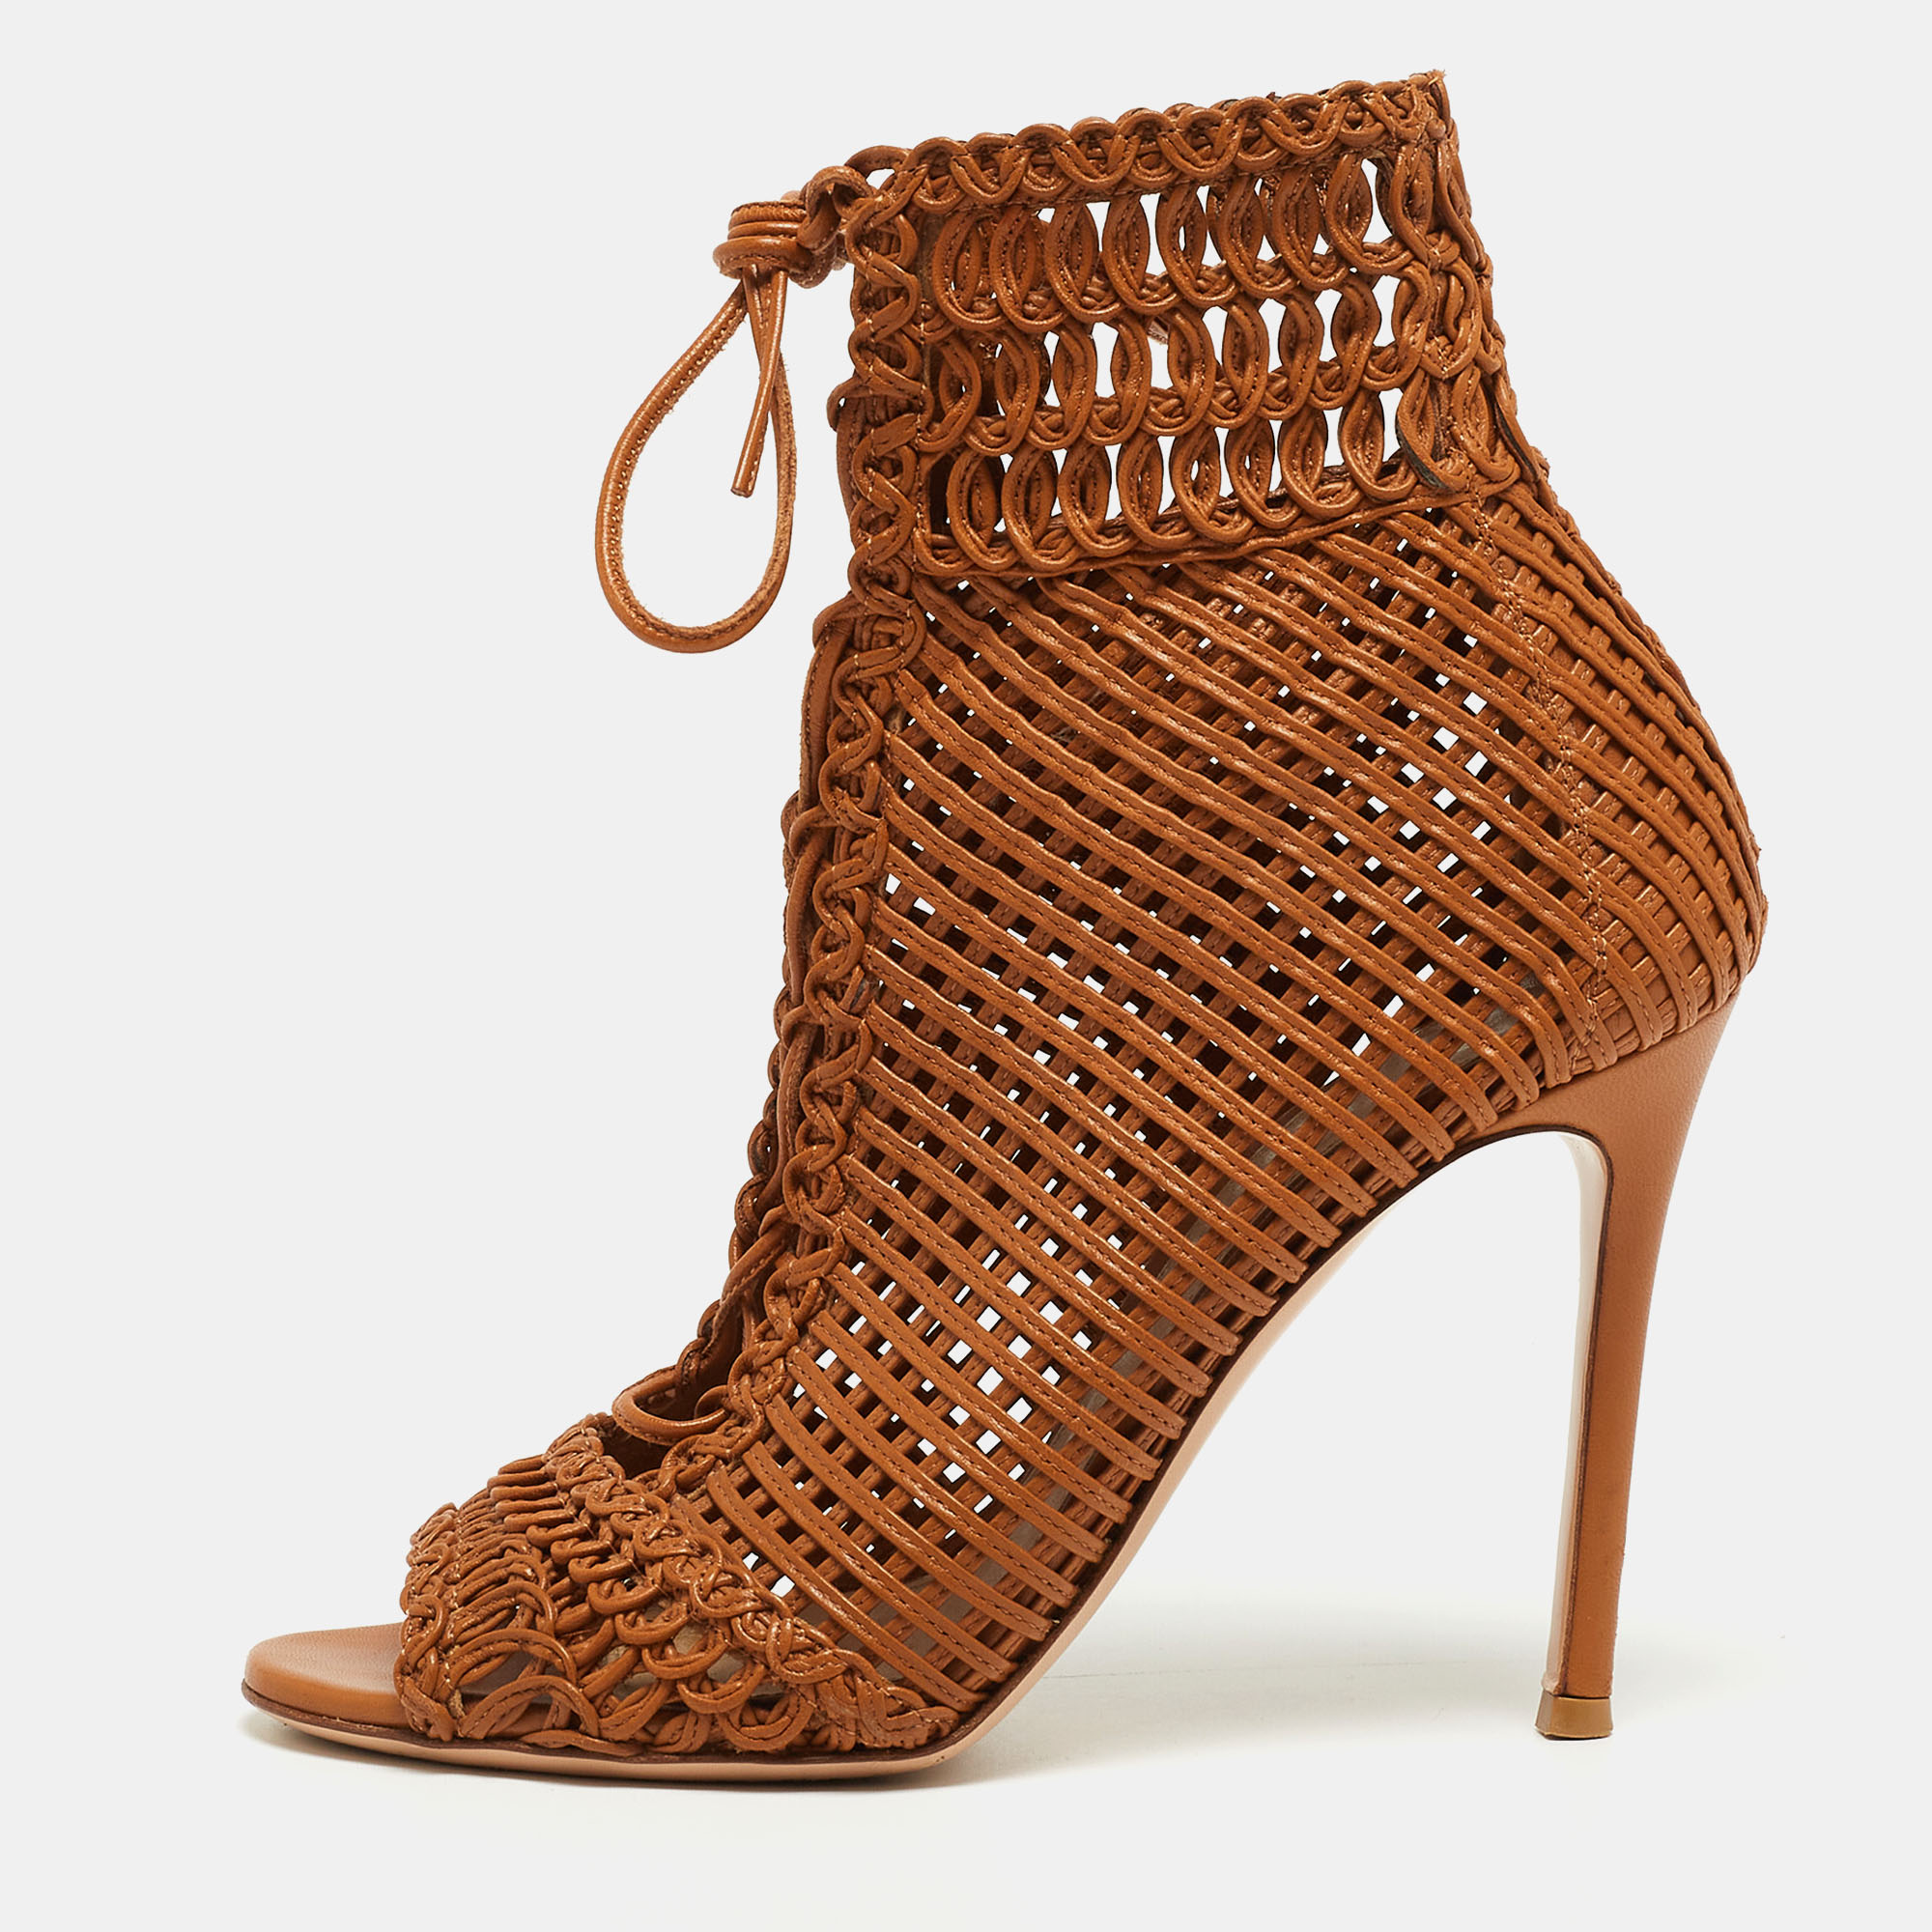 Pre-owned Gianvito Rossi Tan Woven Leather Marnie Ankle Booties Size 36.5